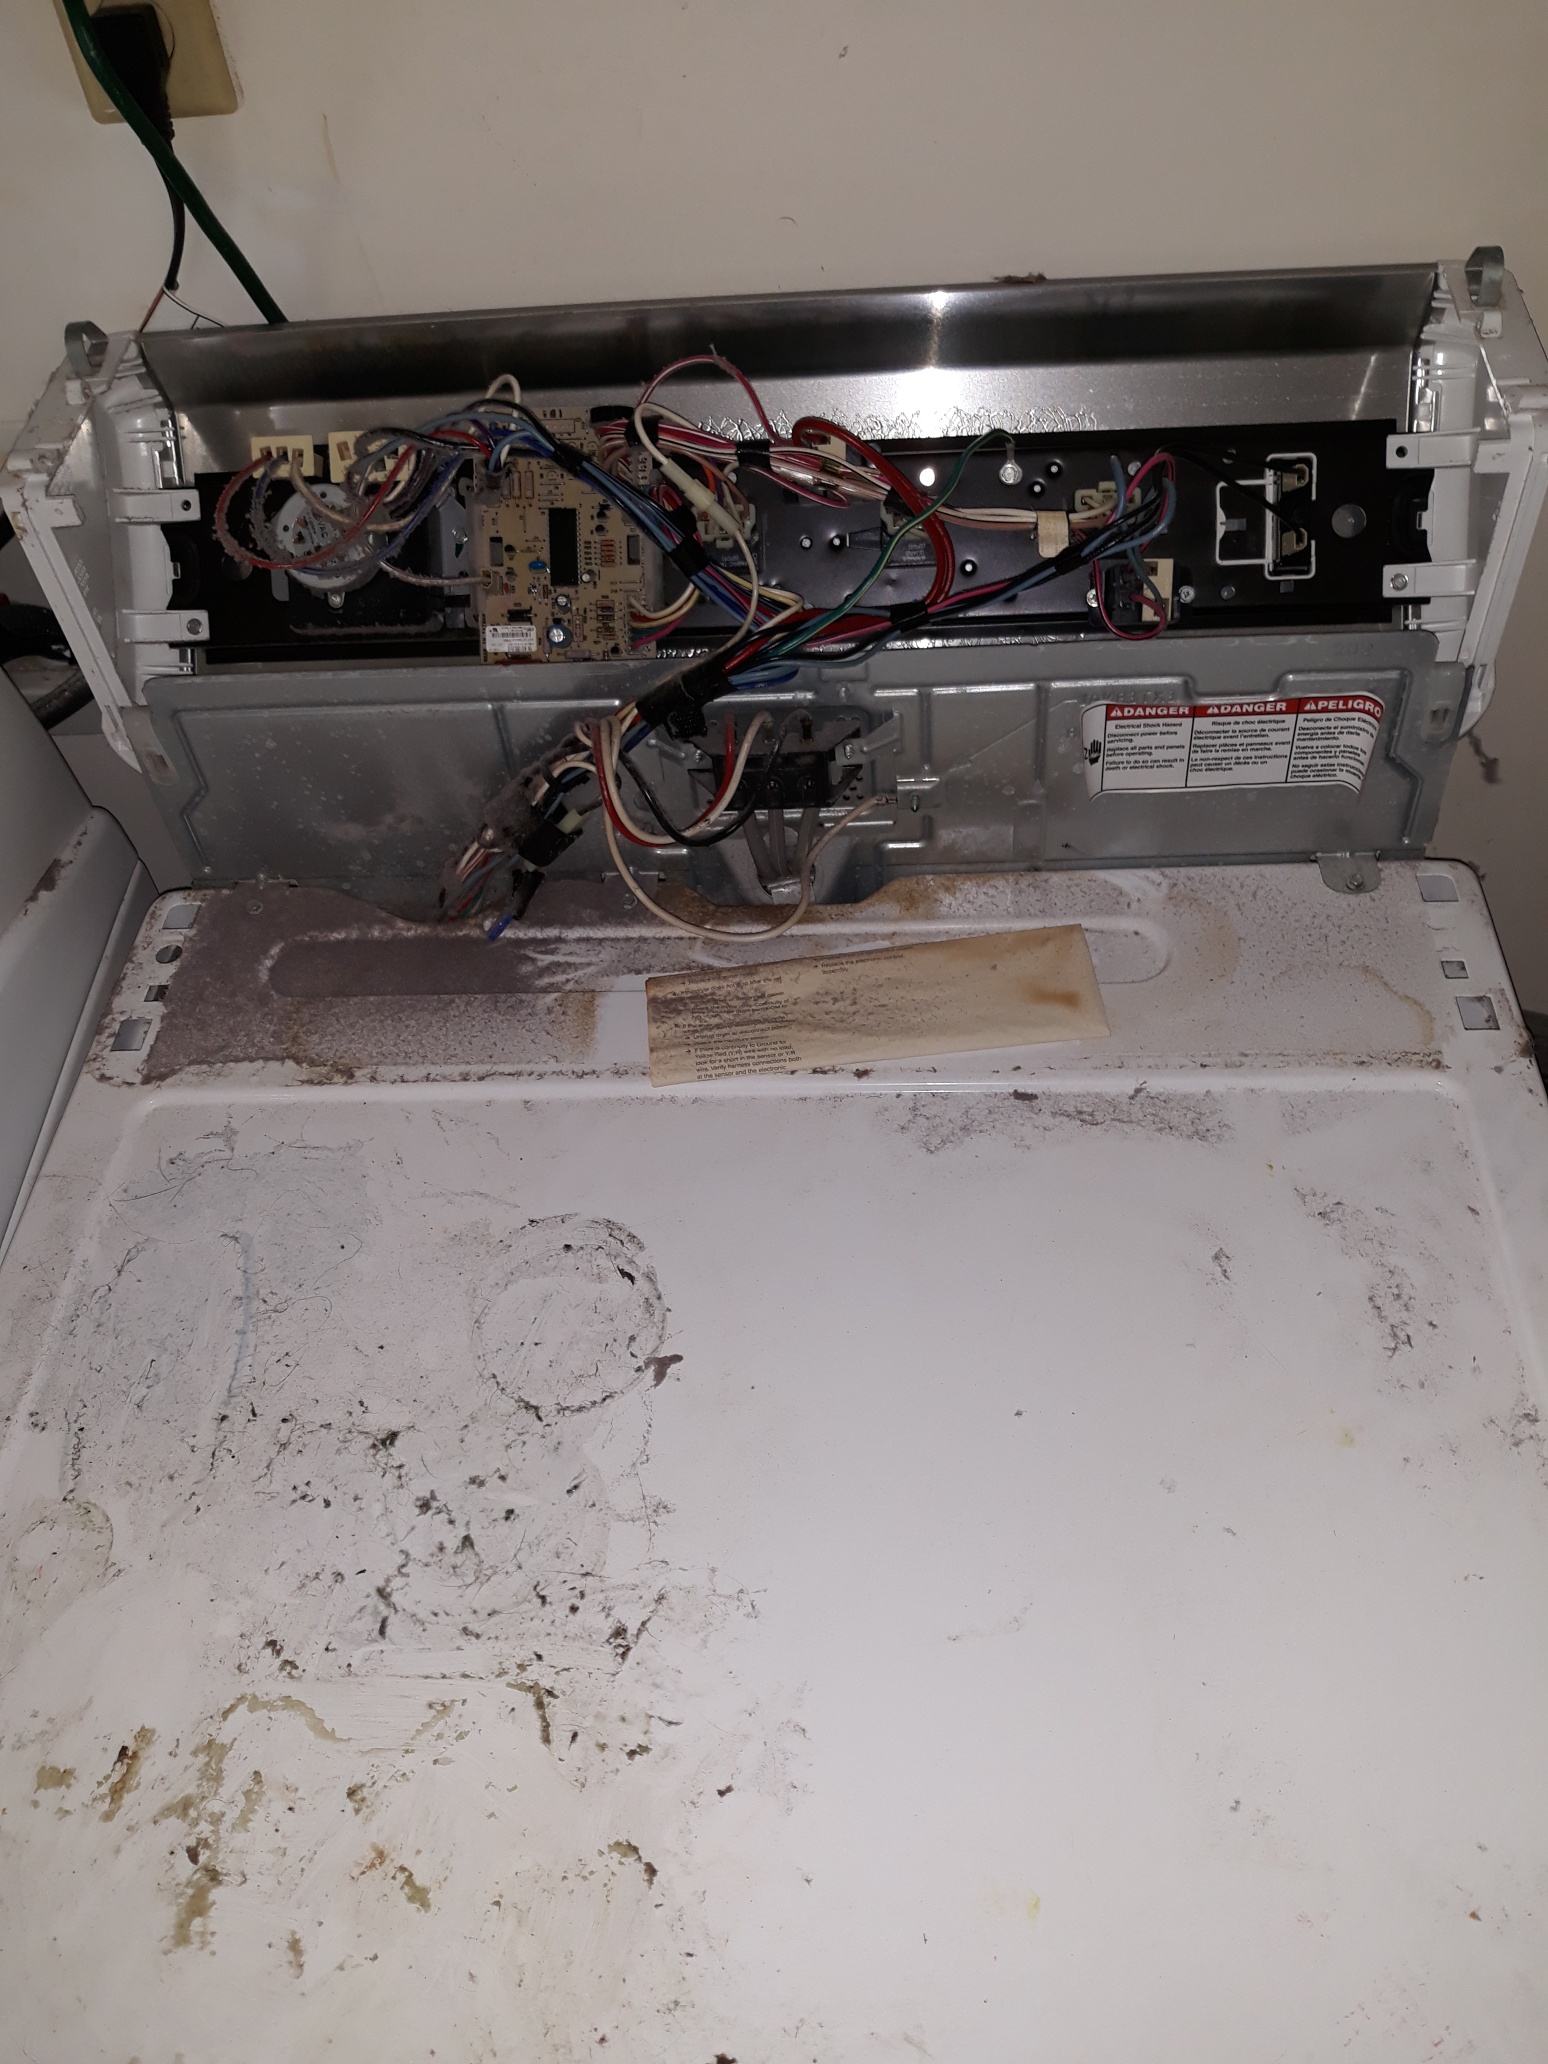 appliance repair dryer repair repair require replacement of the failed control timer that has internal contact damage se 167 ln weirsdale fl 32195